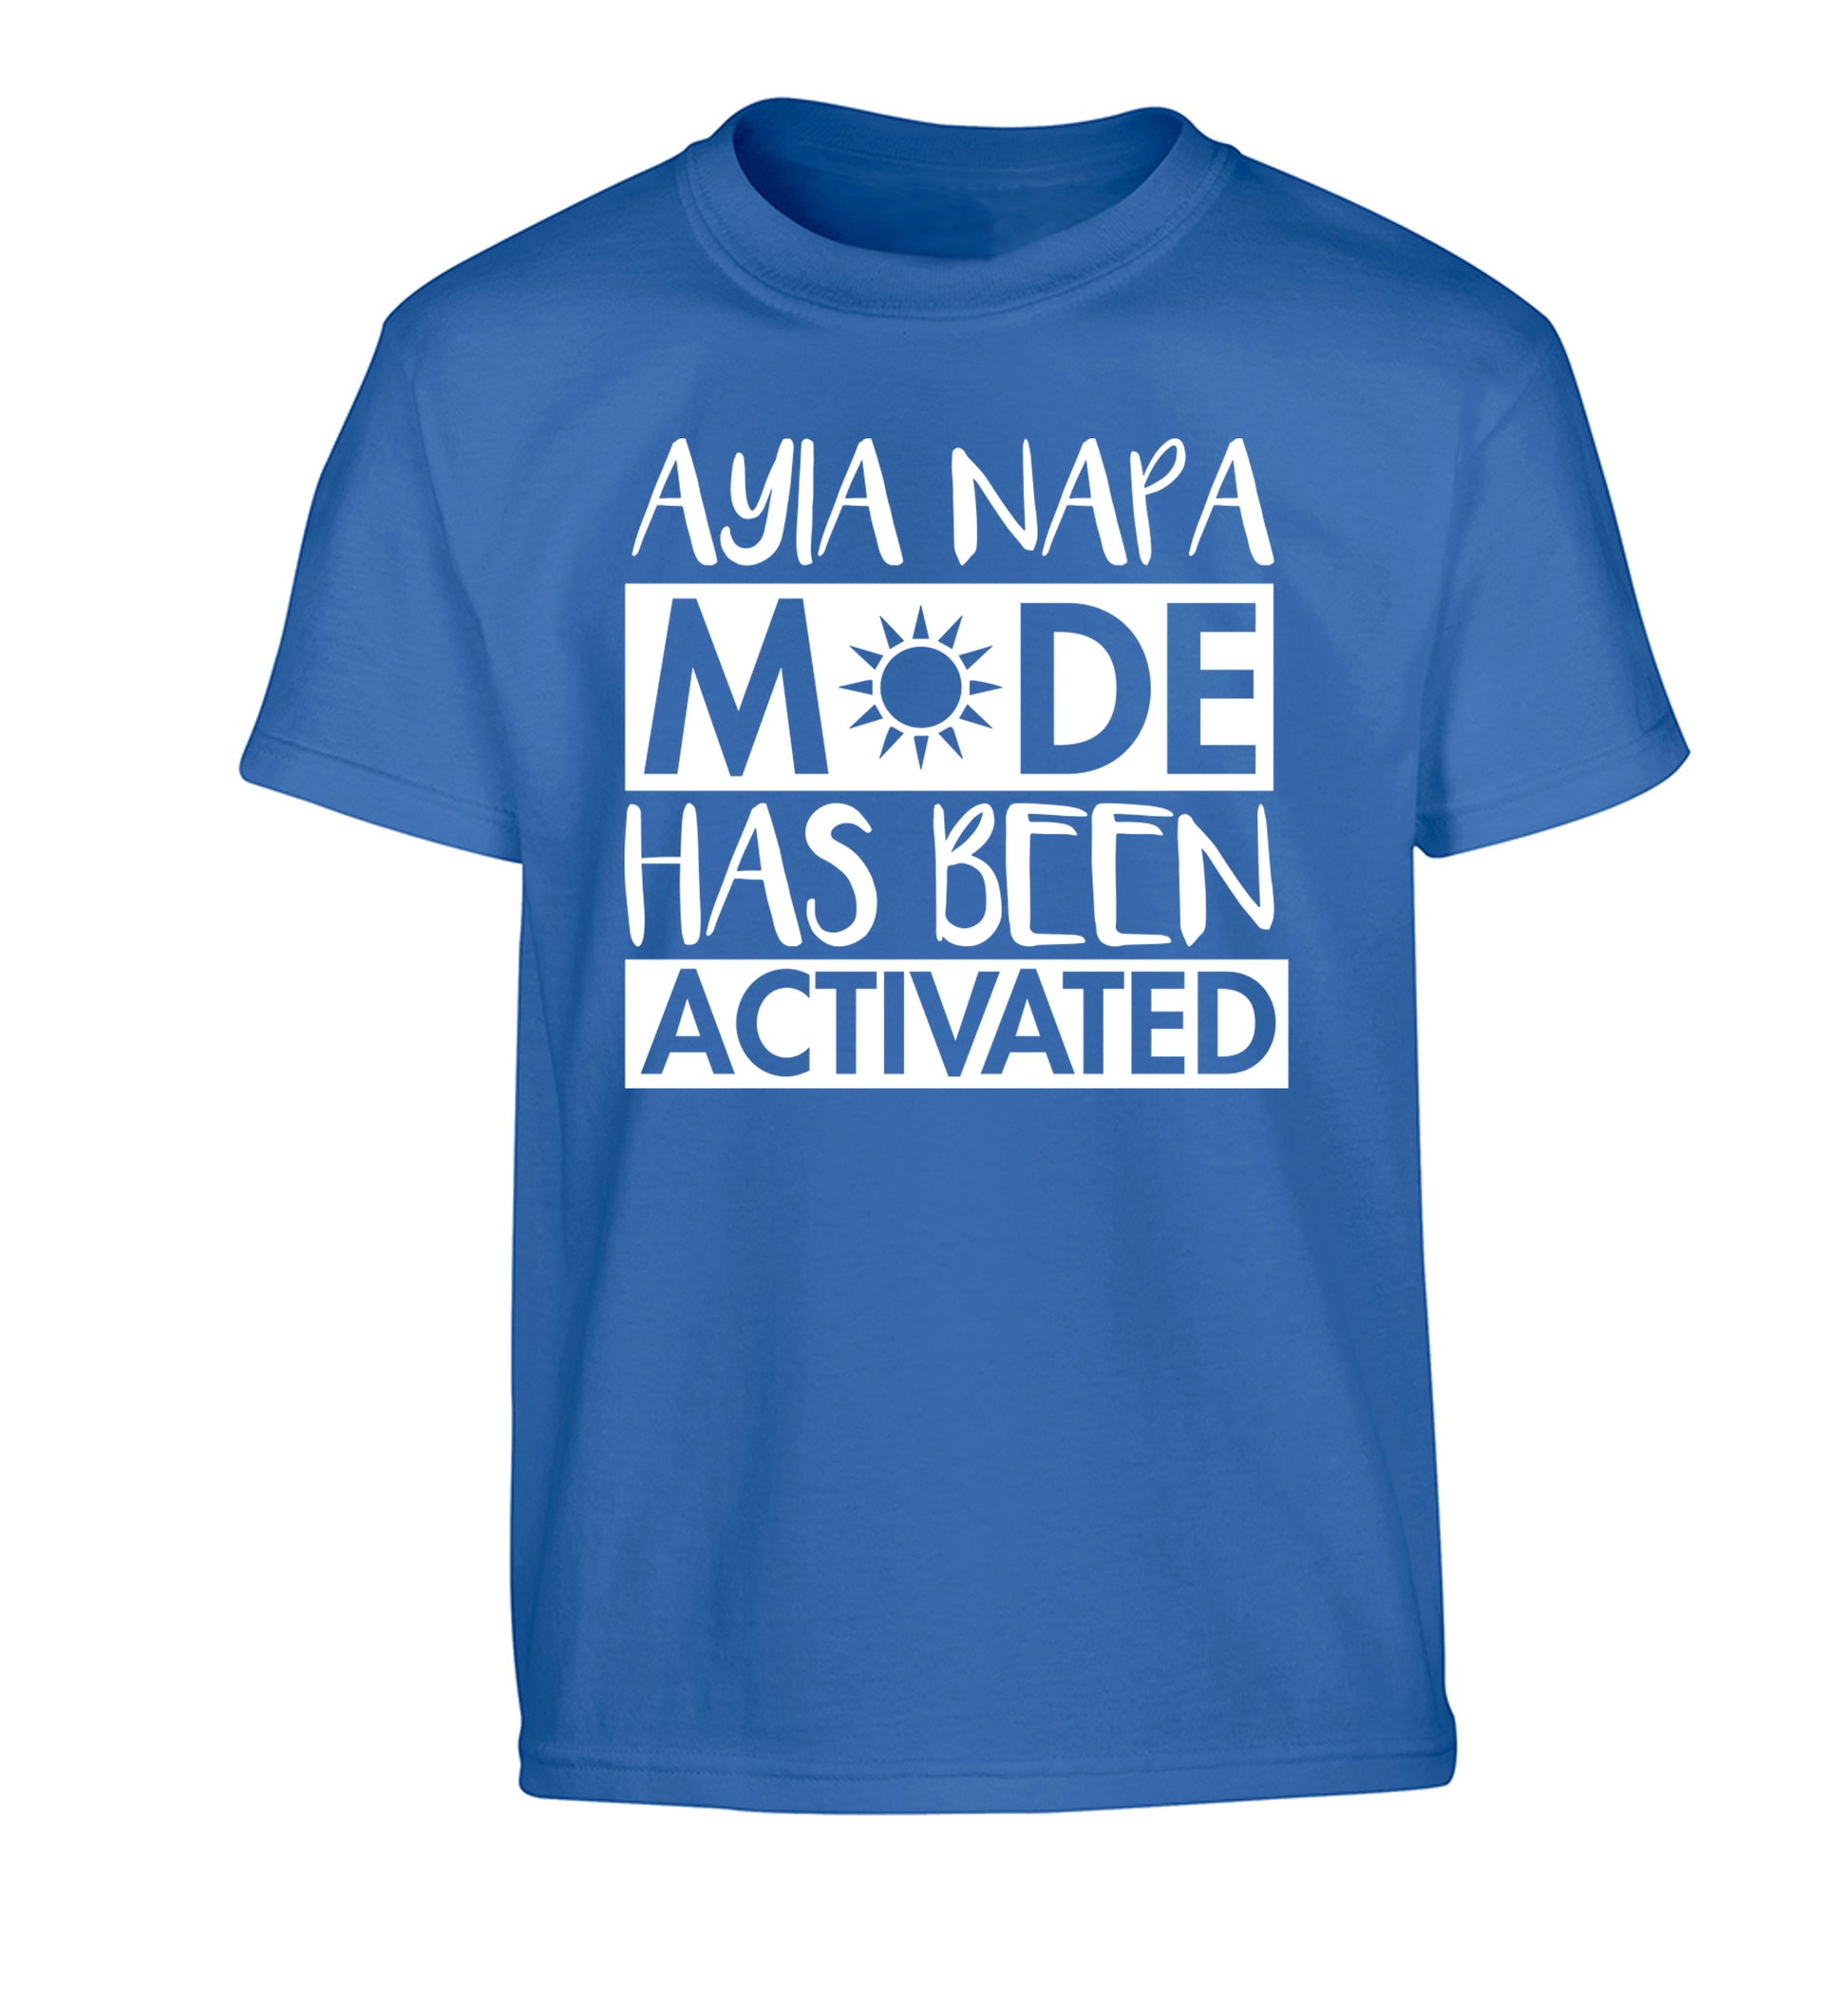 Ayia Napa mode has been activated Children's blue Tshirt 12-13 Years